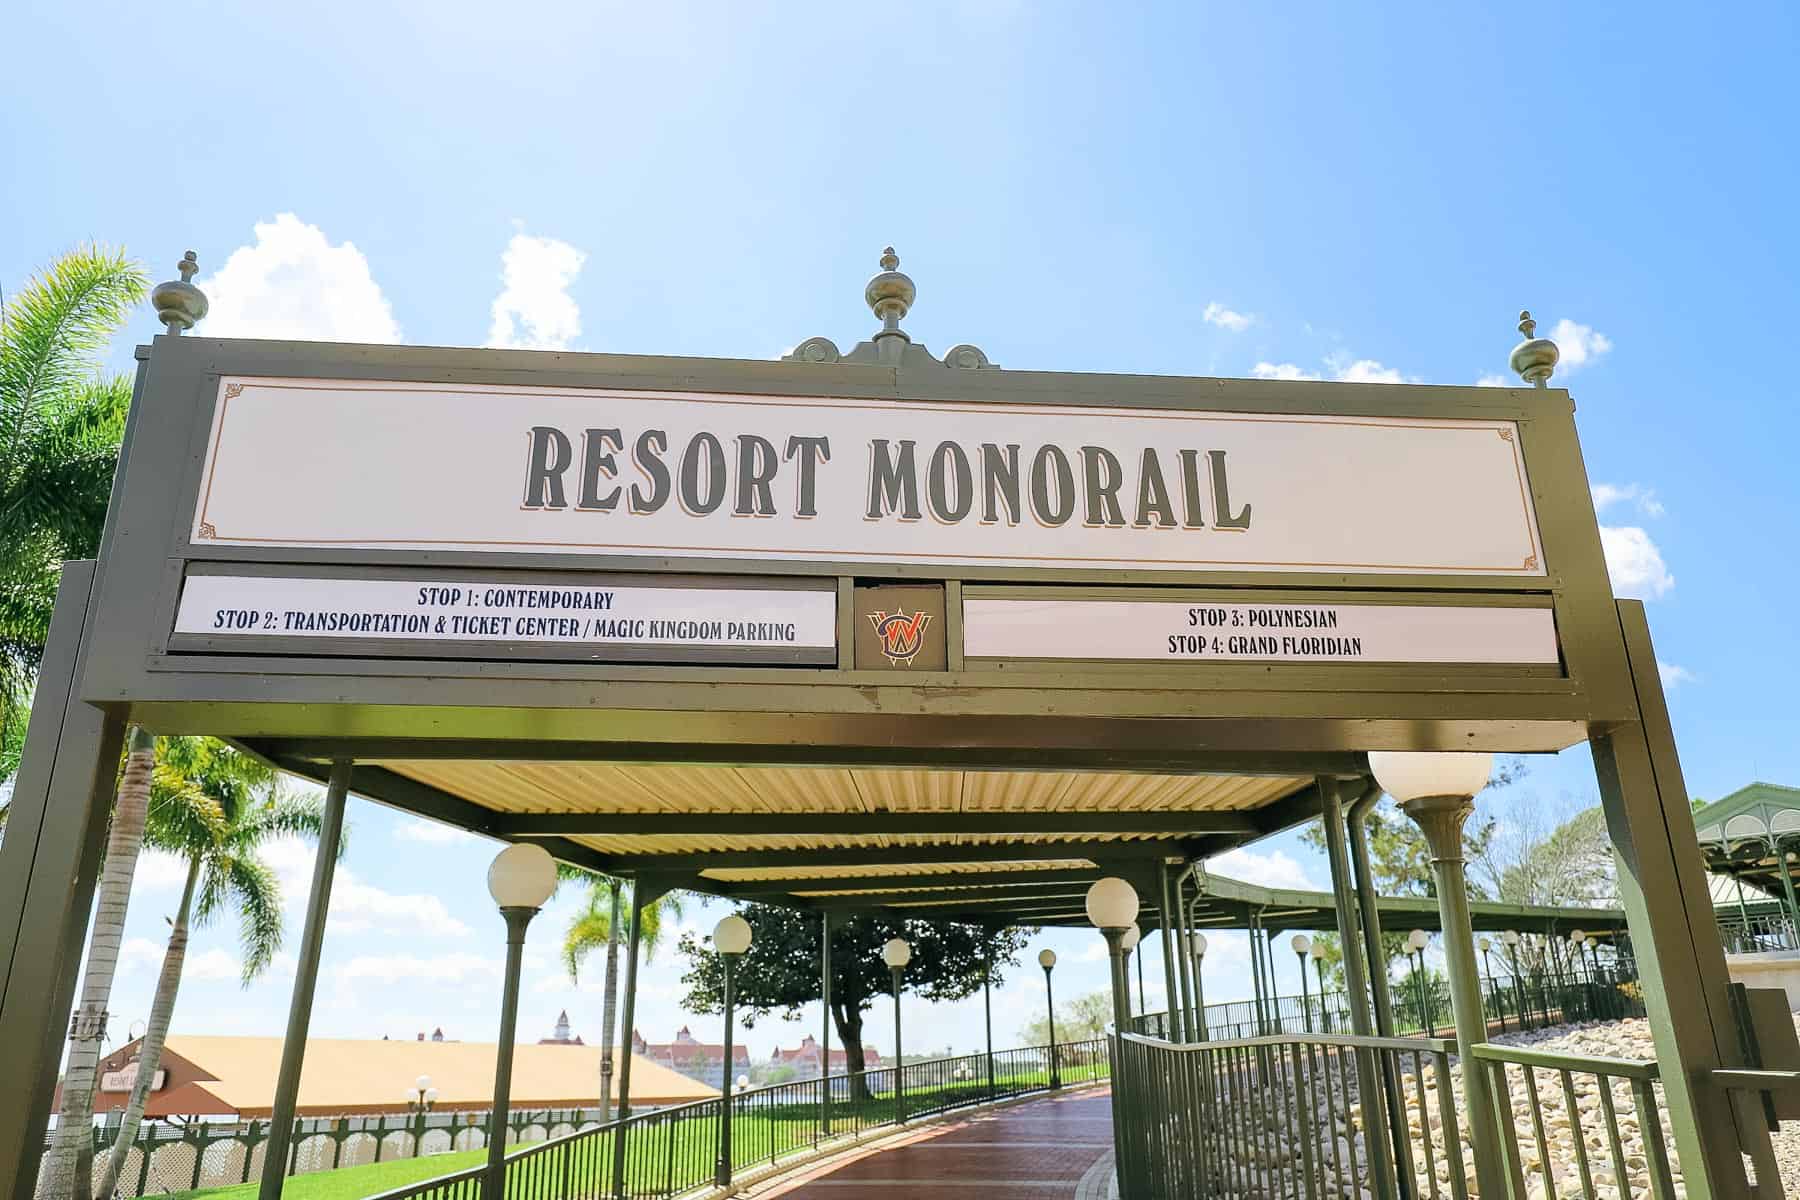 Resort Monorail sign with Grand Floridian listed as fourth stop from Magic Kingdom. 